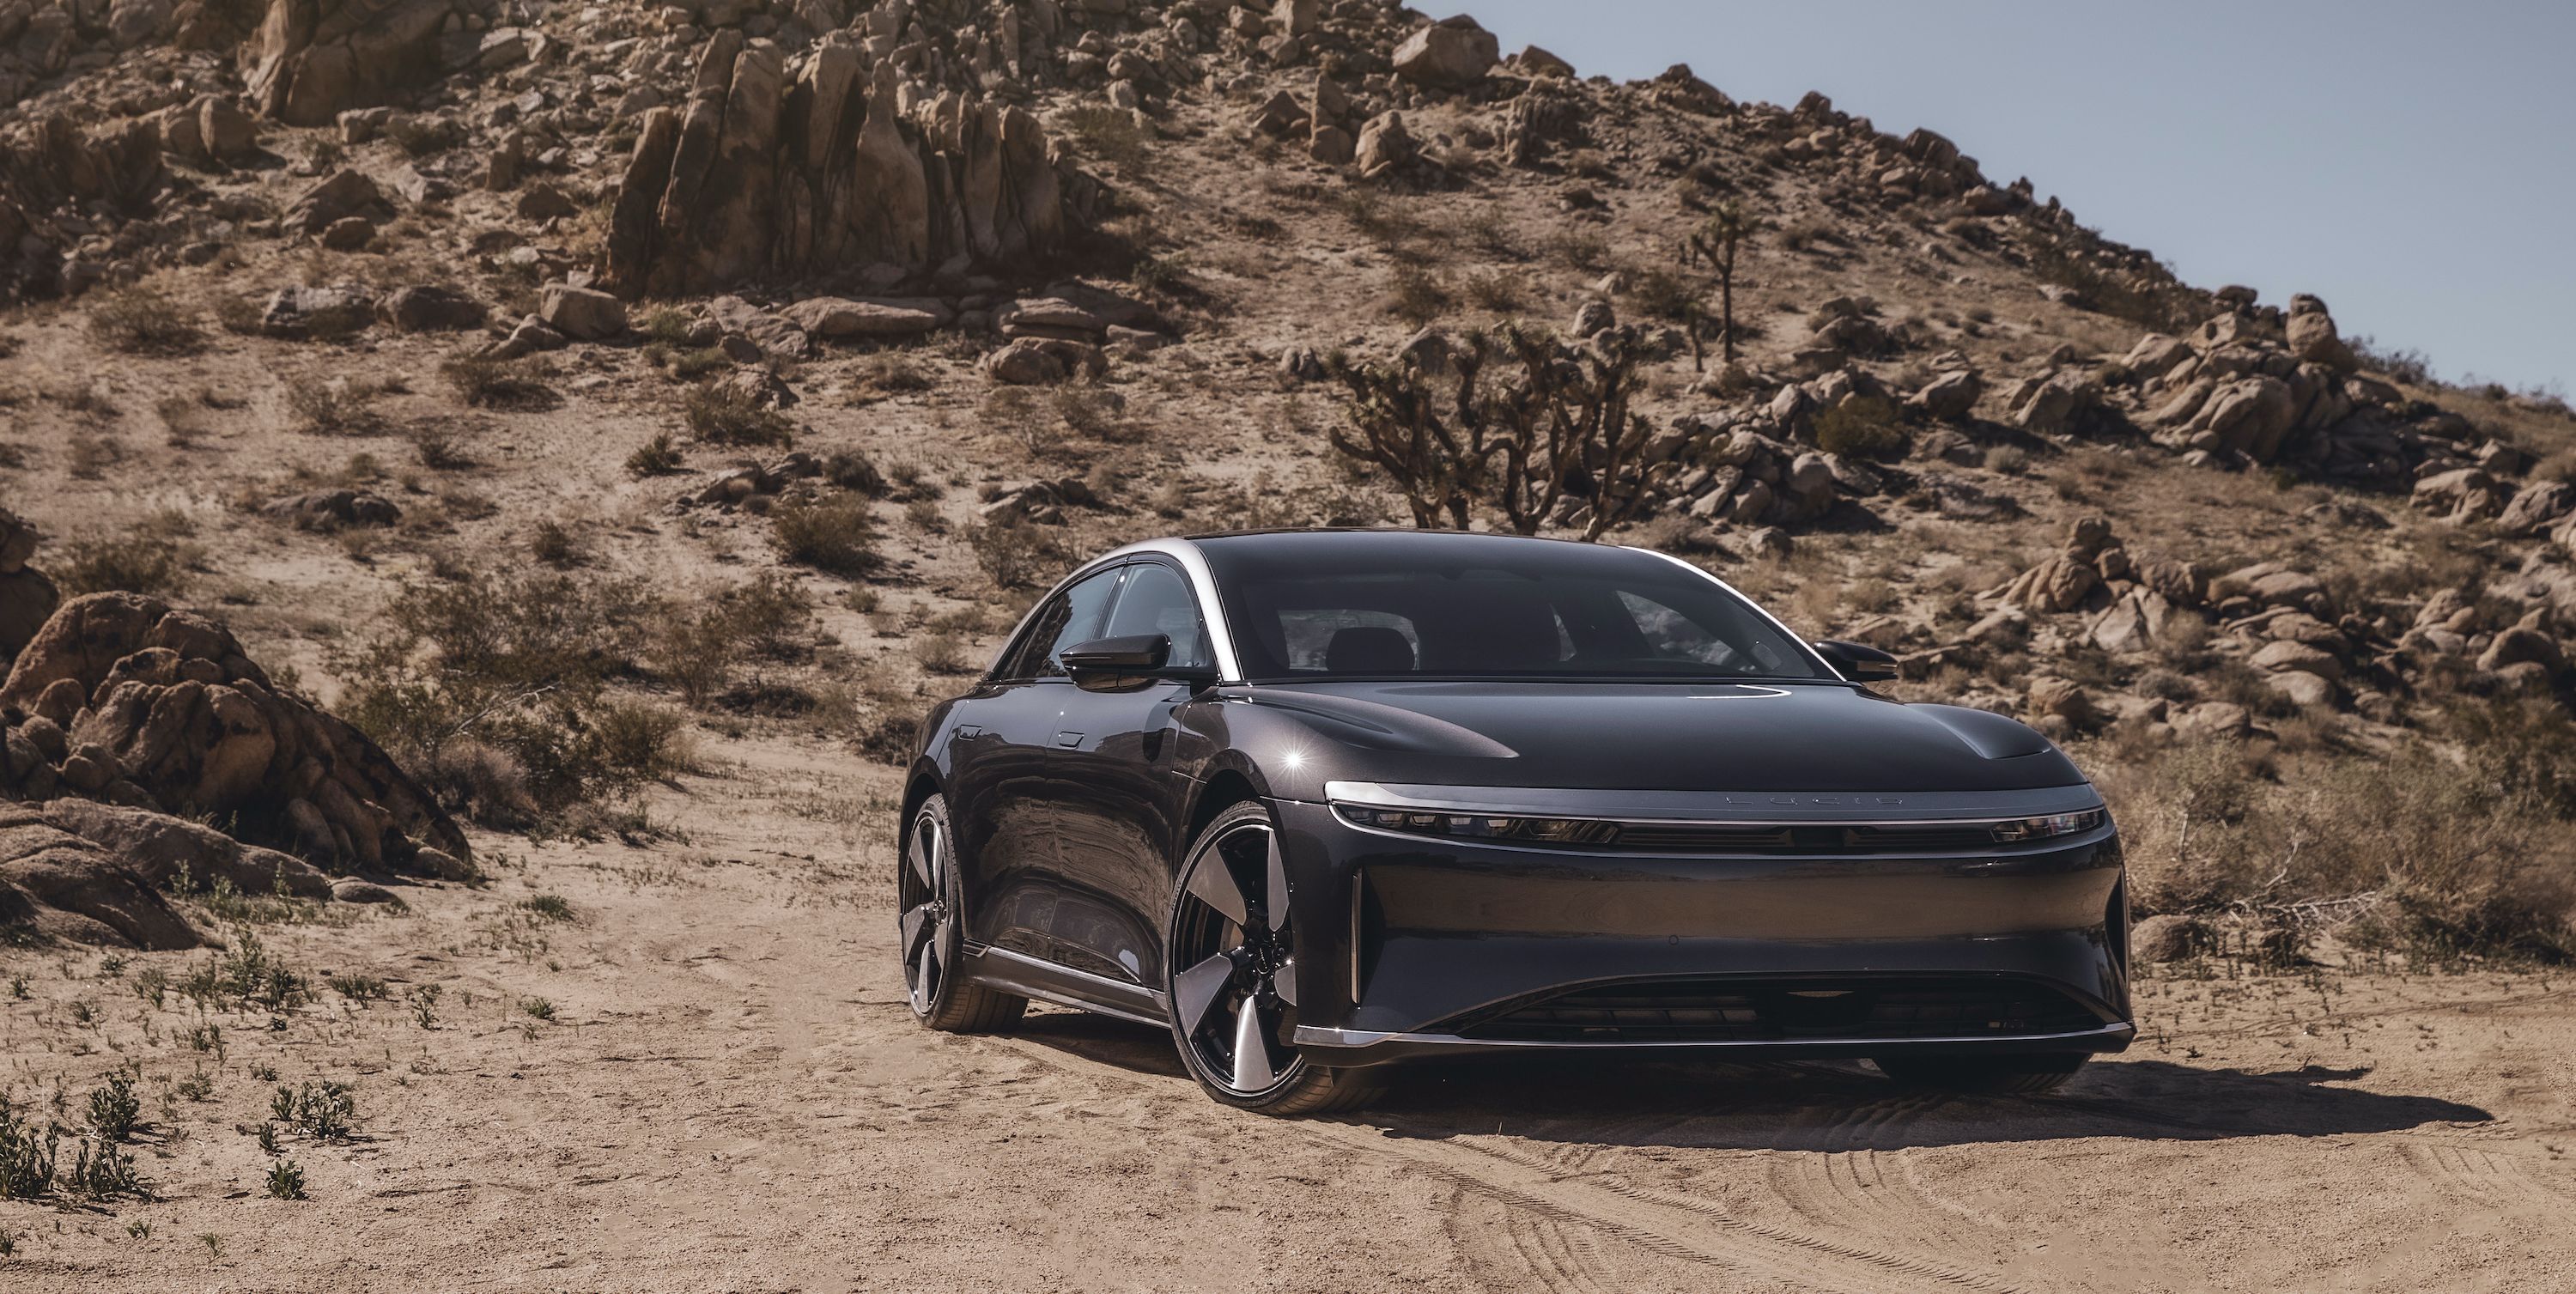 The Lucid Air Grand Touring Performance Hits 60 in 2.6 Seconds, Goes 446 Miles on Charge